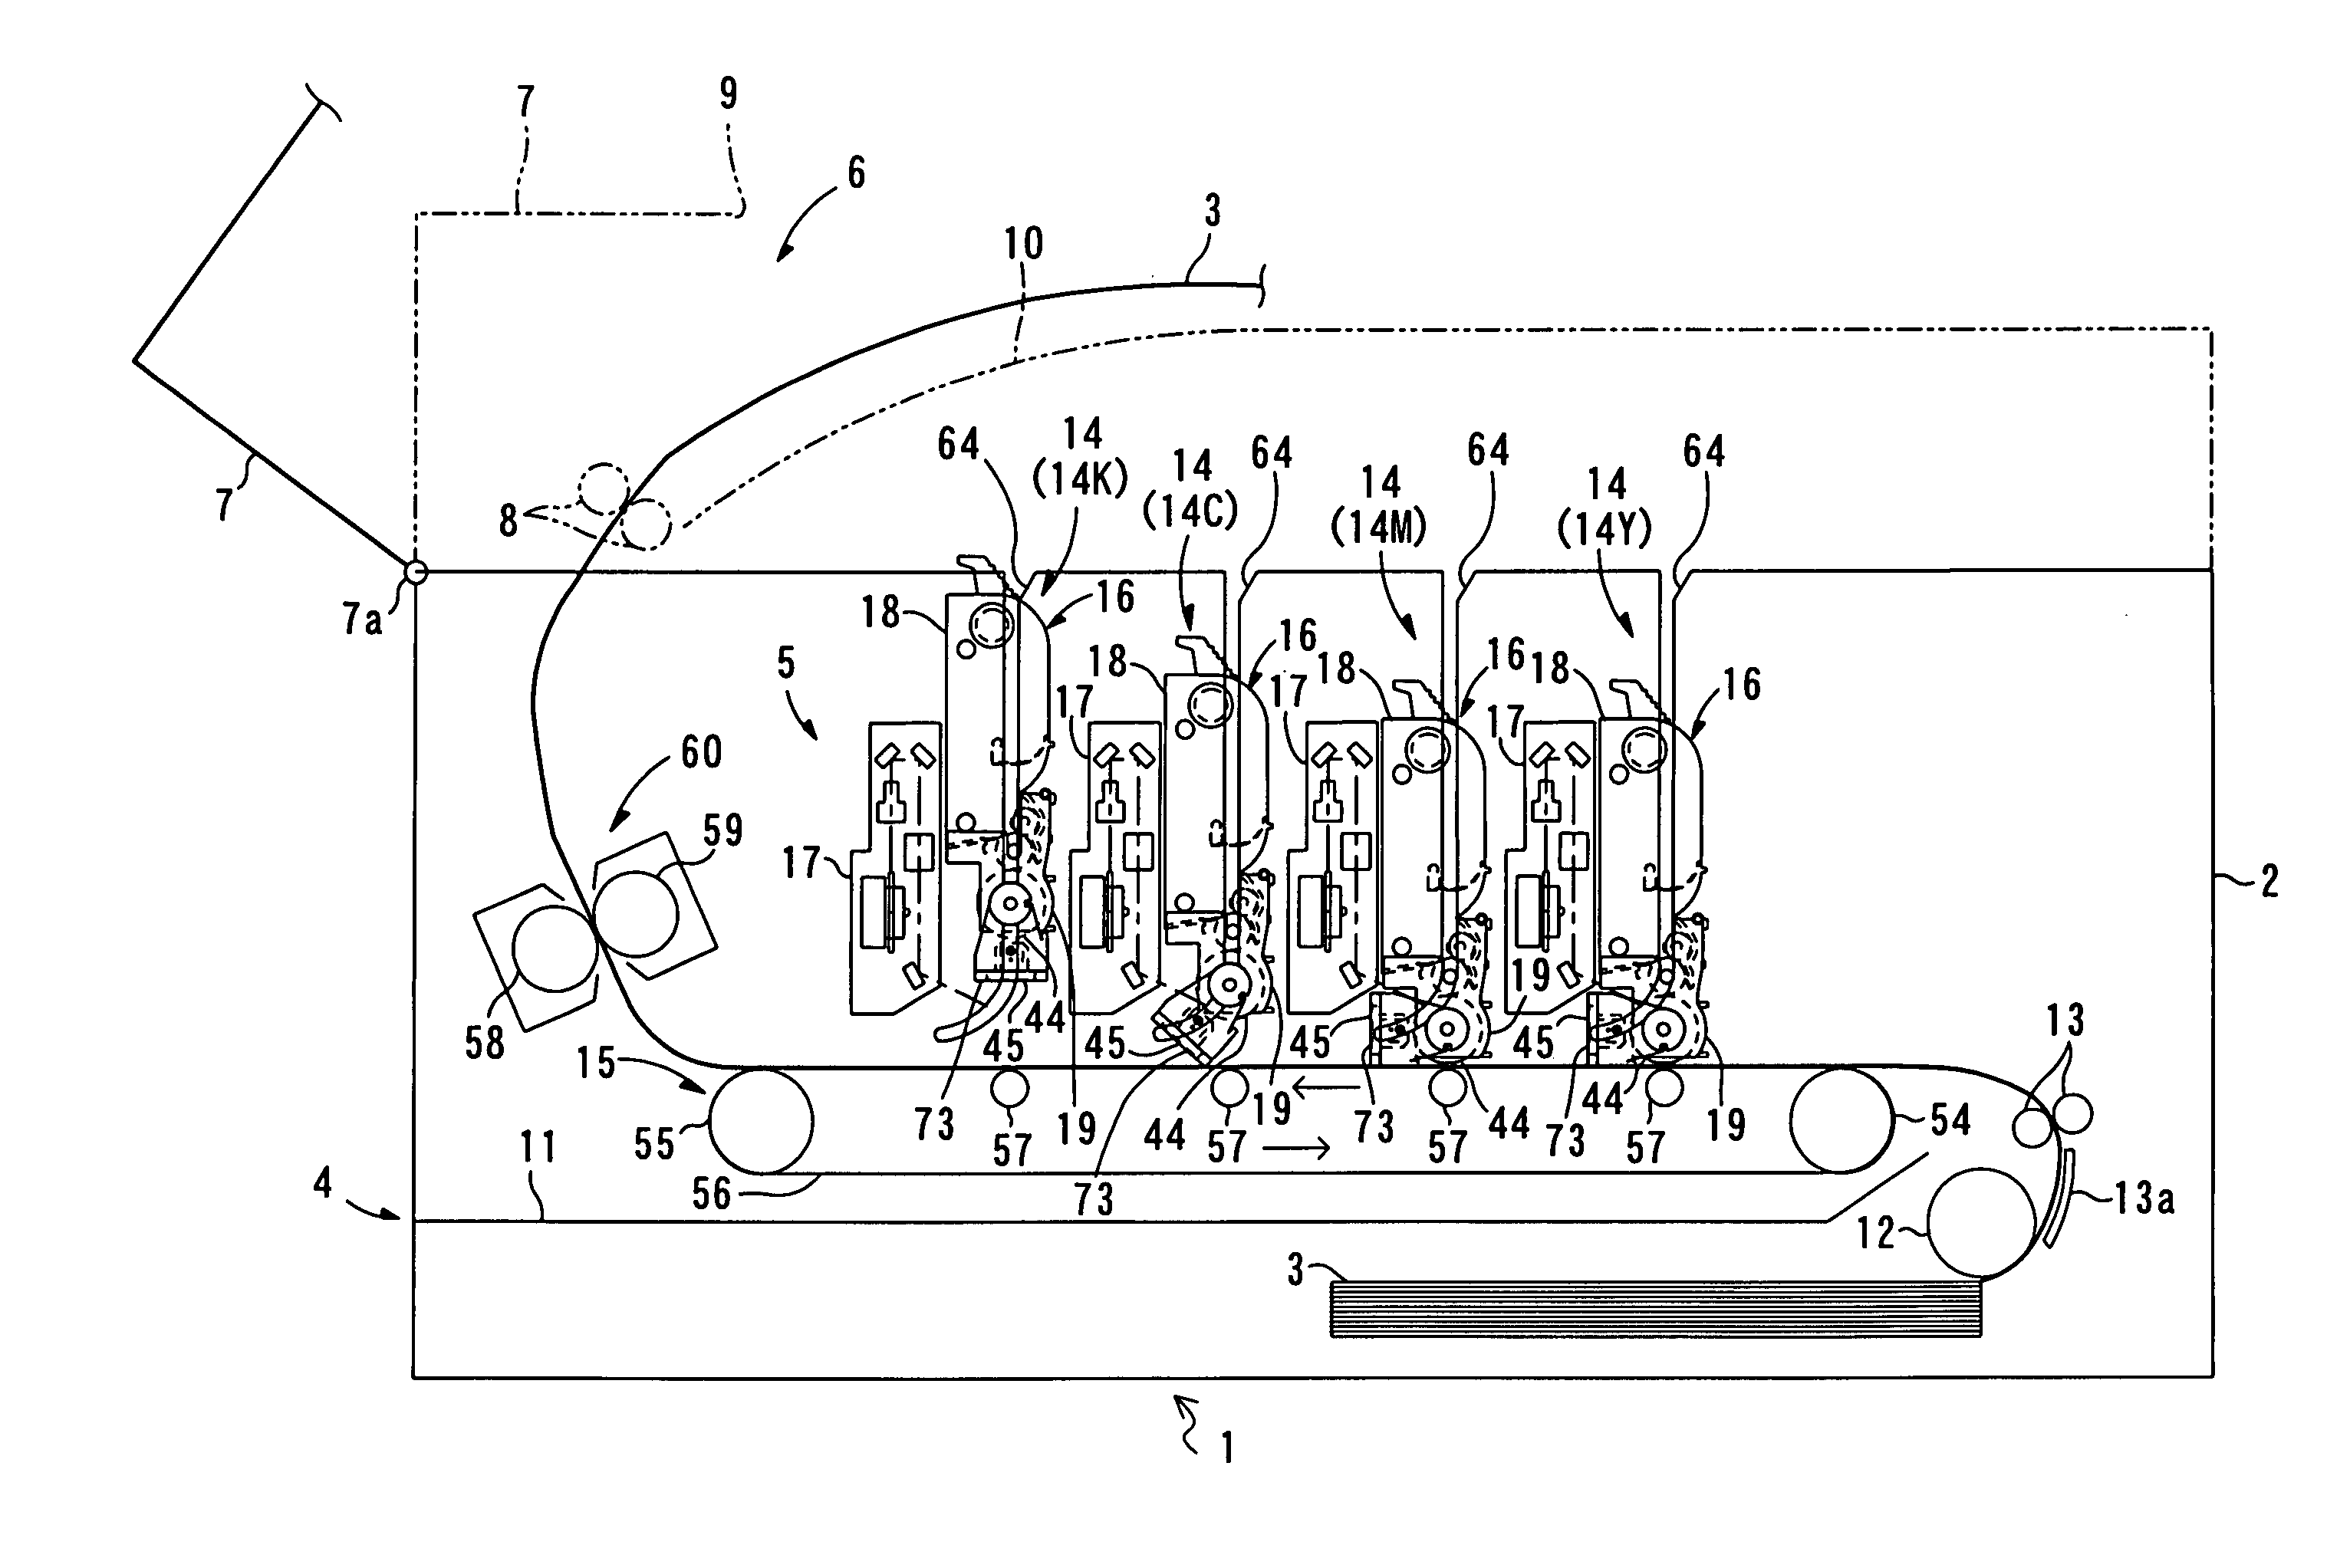 Image forming apparatus with processing unit that can be removed from the image forming apparatus without removing exposing devices